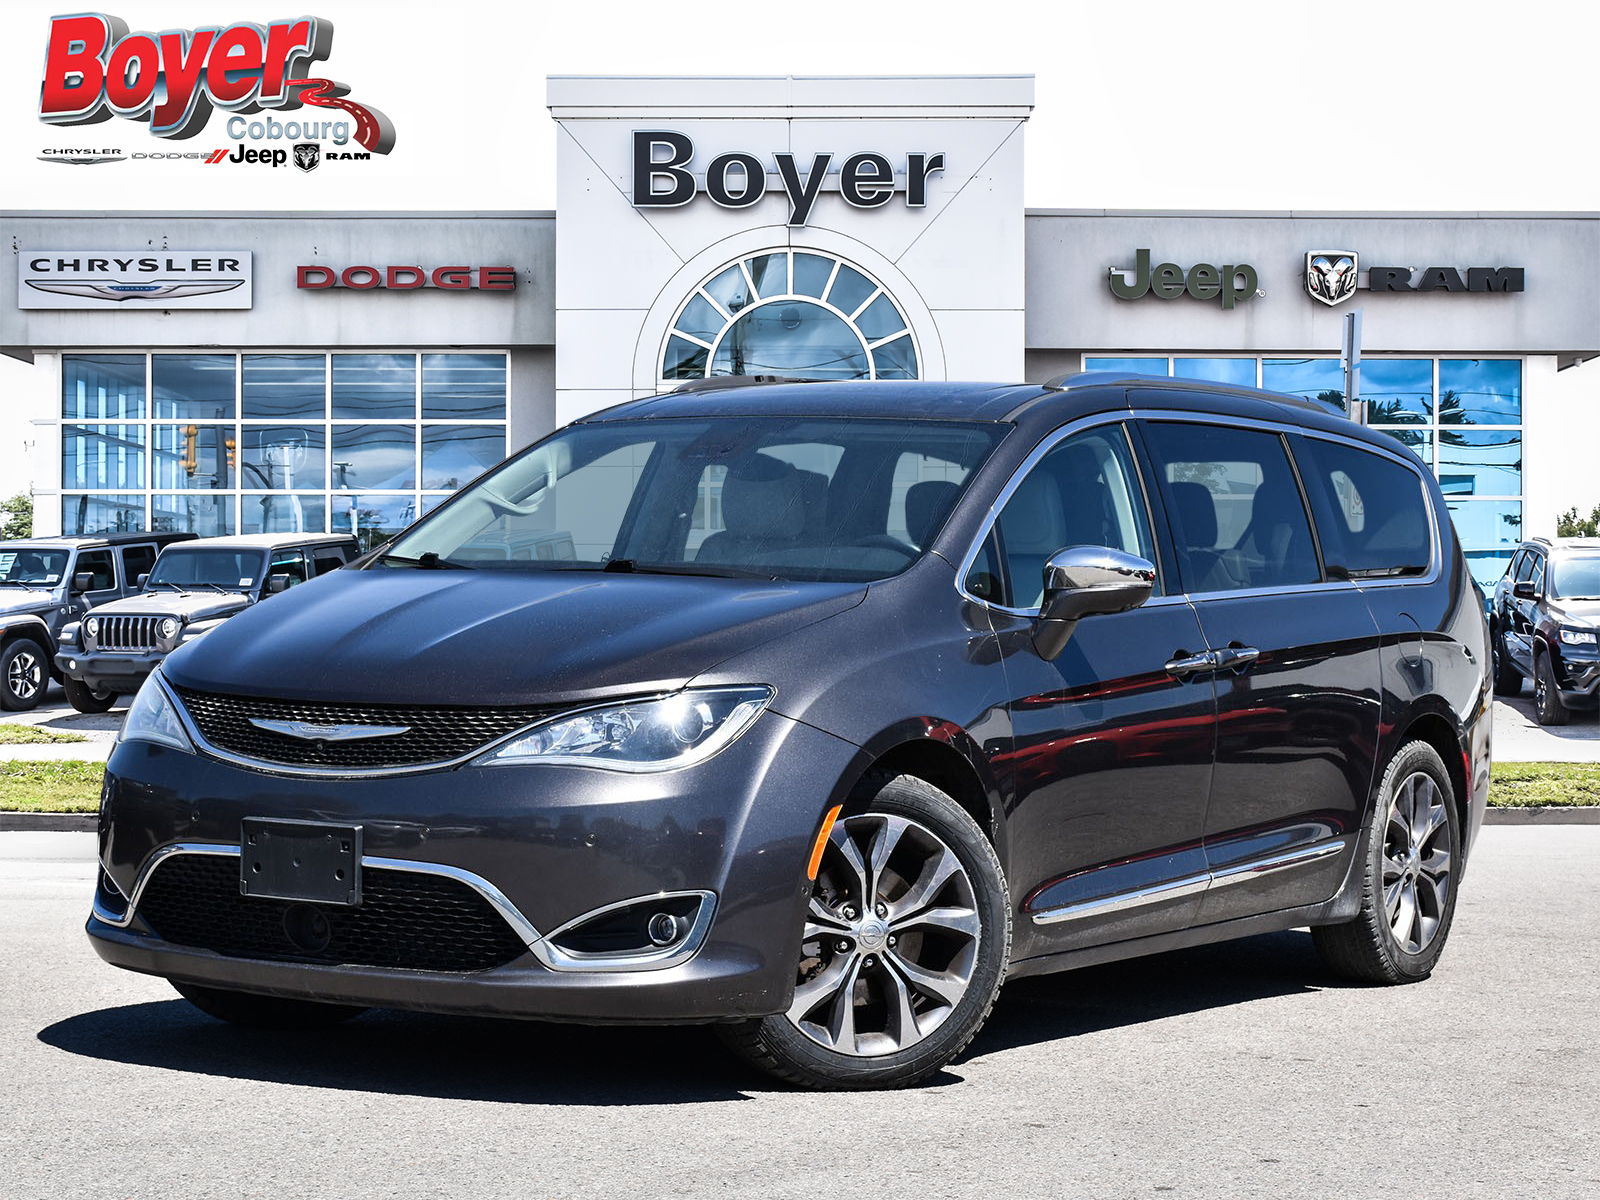 2017 Chrysler Pacifica LIMITED - Theatre & Sound - Trailer Tow Group 